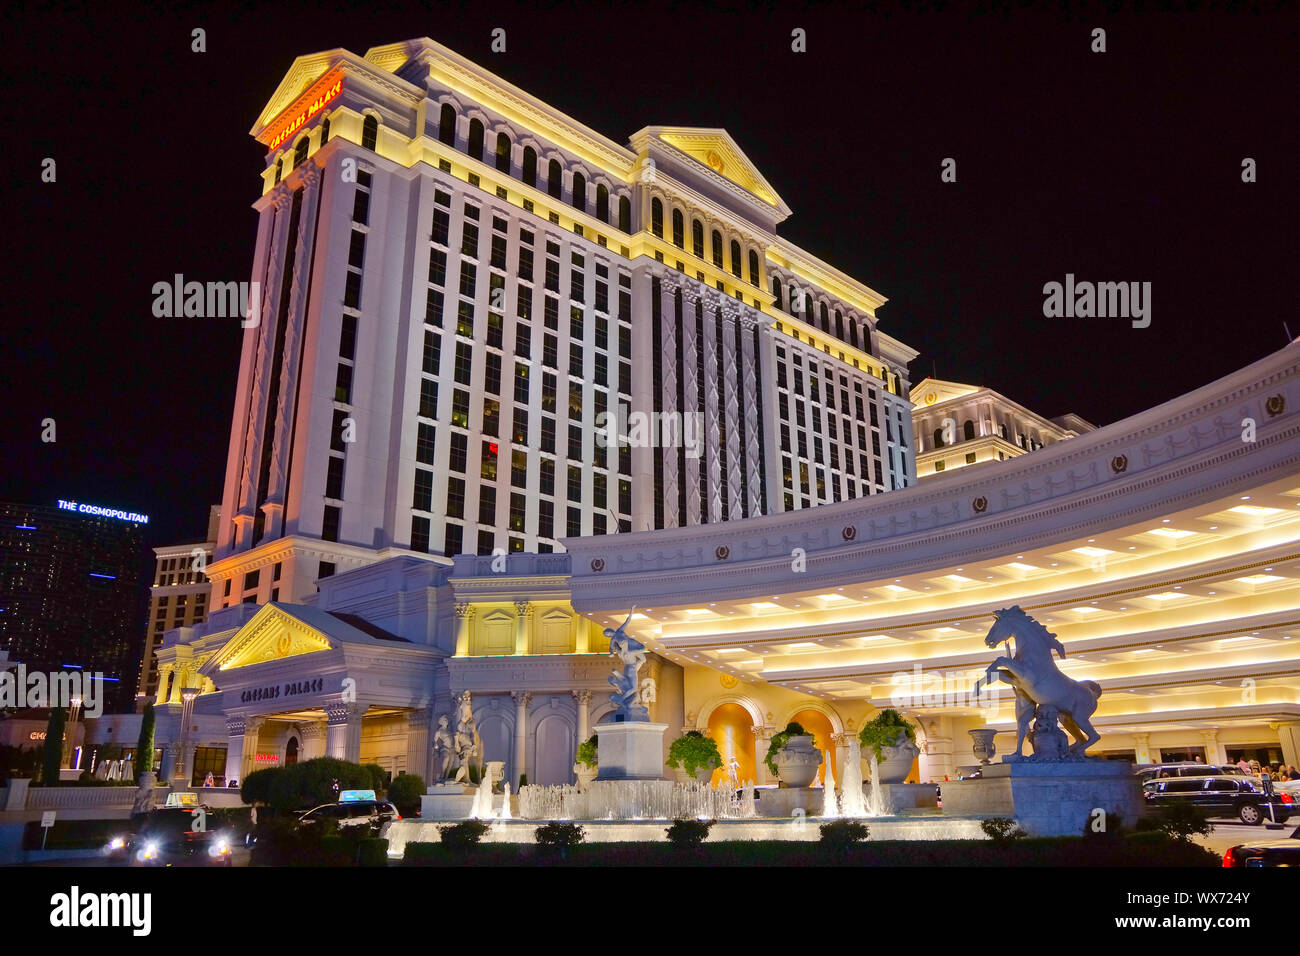 ceasars palace casino and hotel at night Stock Photo